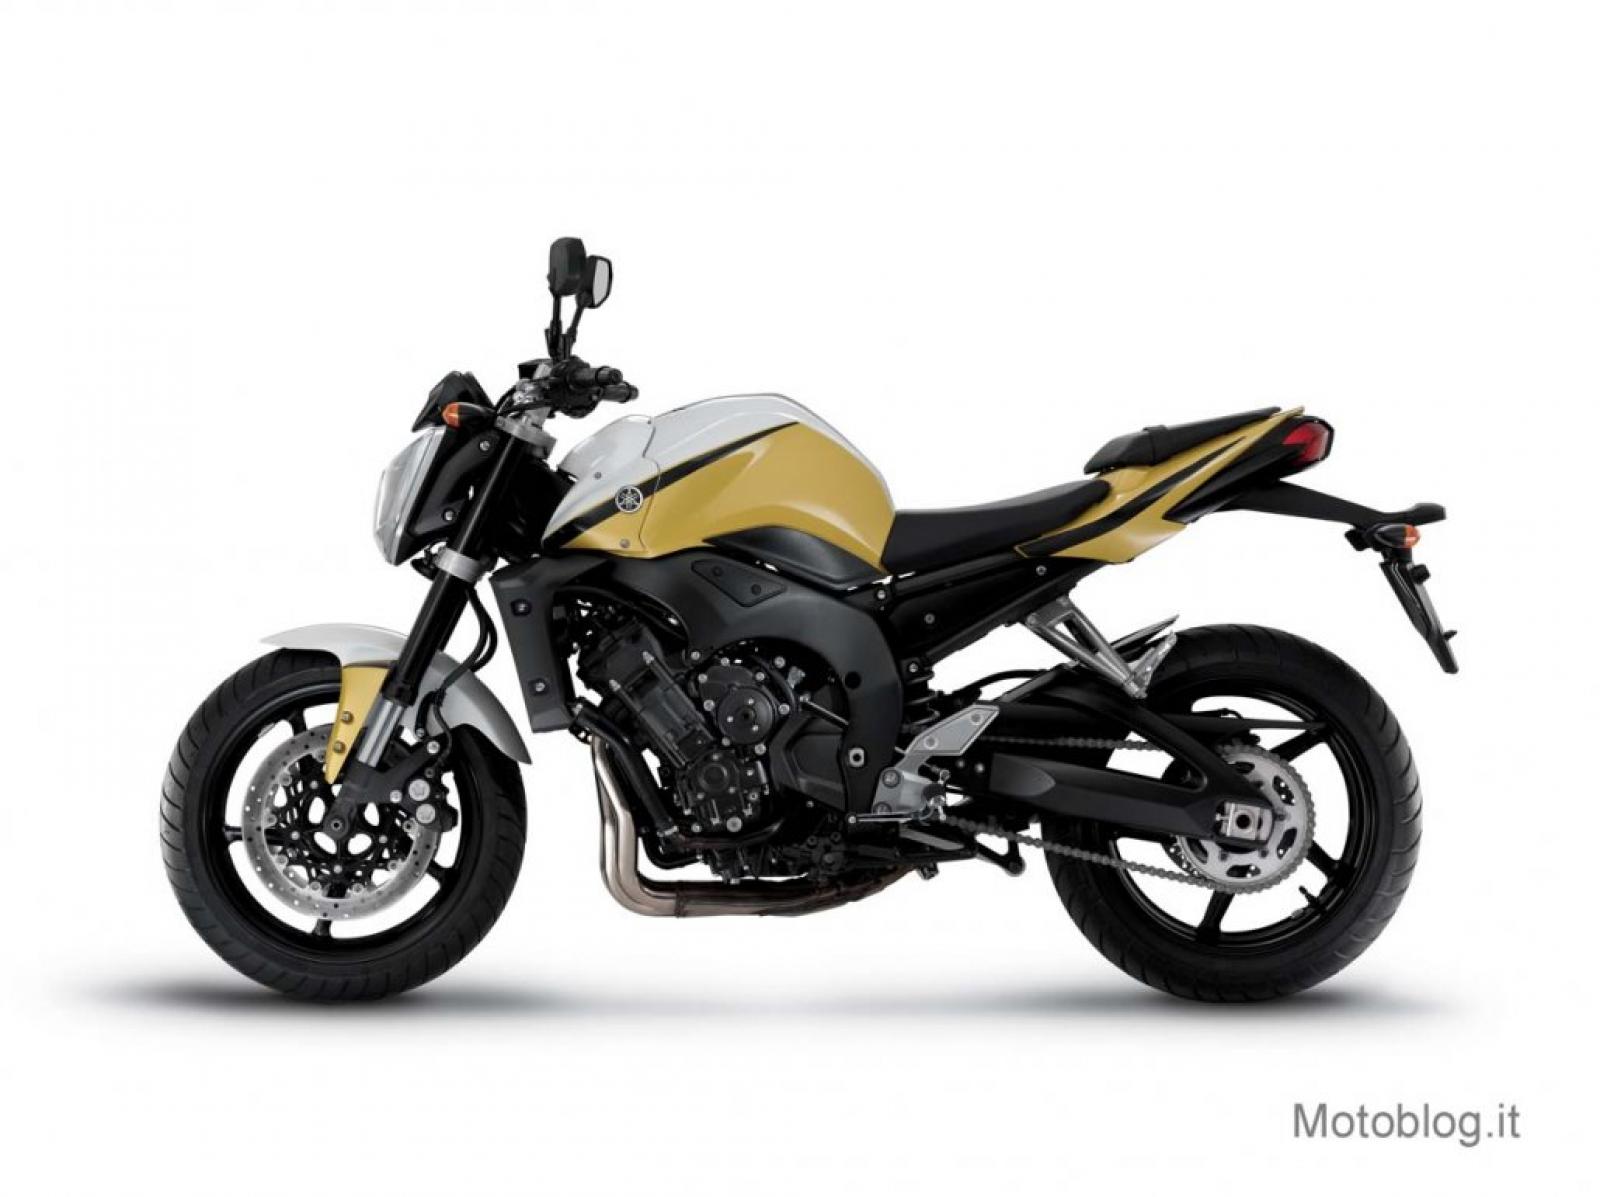 Yamaha FZ16, Motorcycles, Motorcycles for Sale, Class 2B 